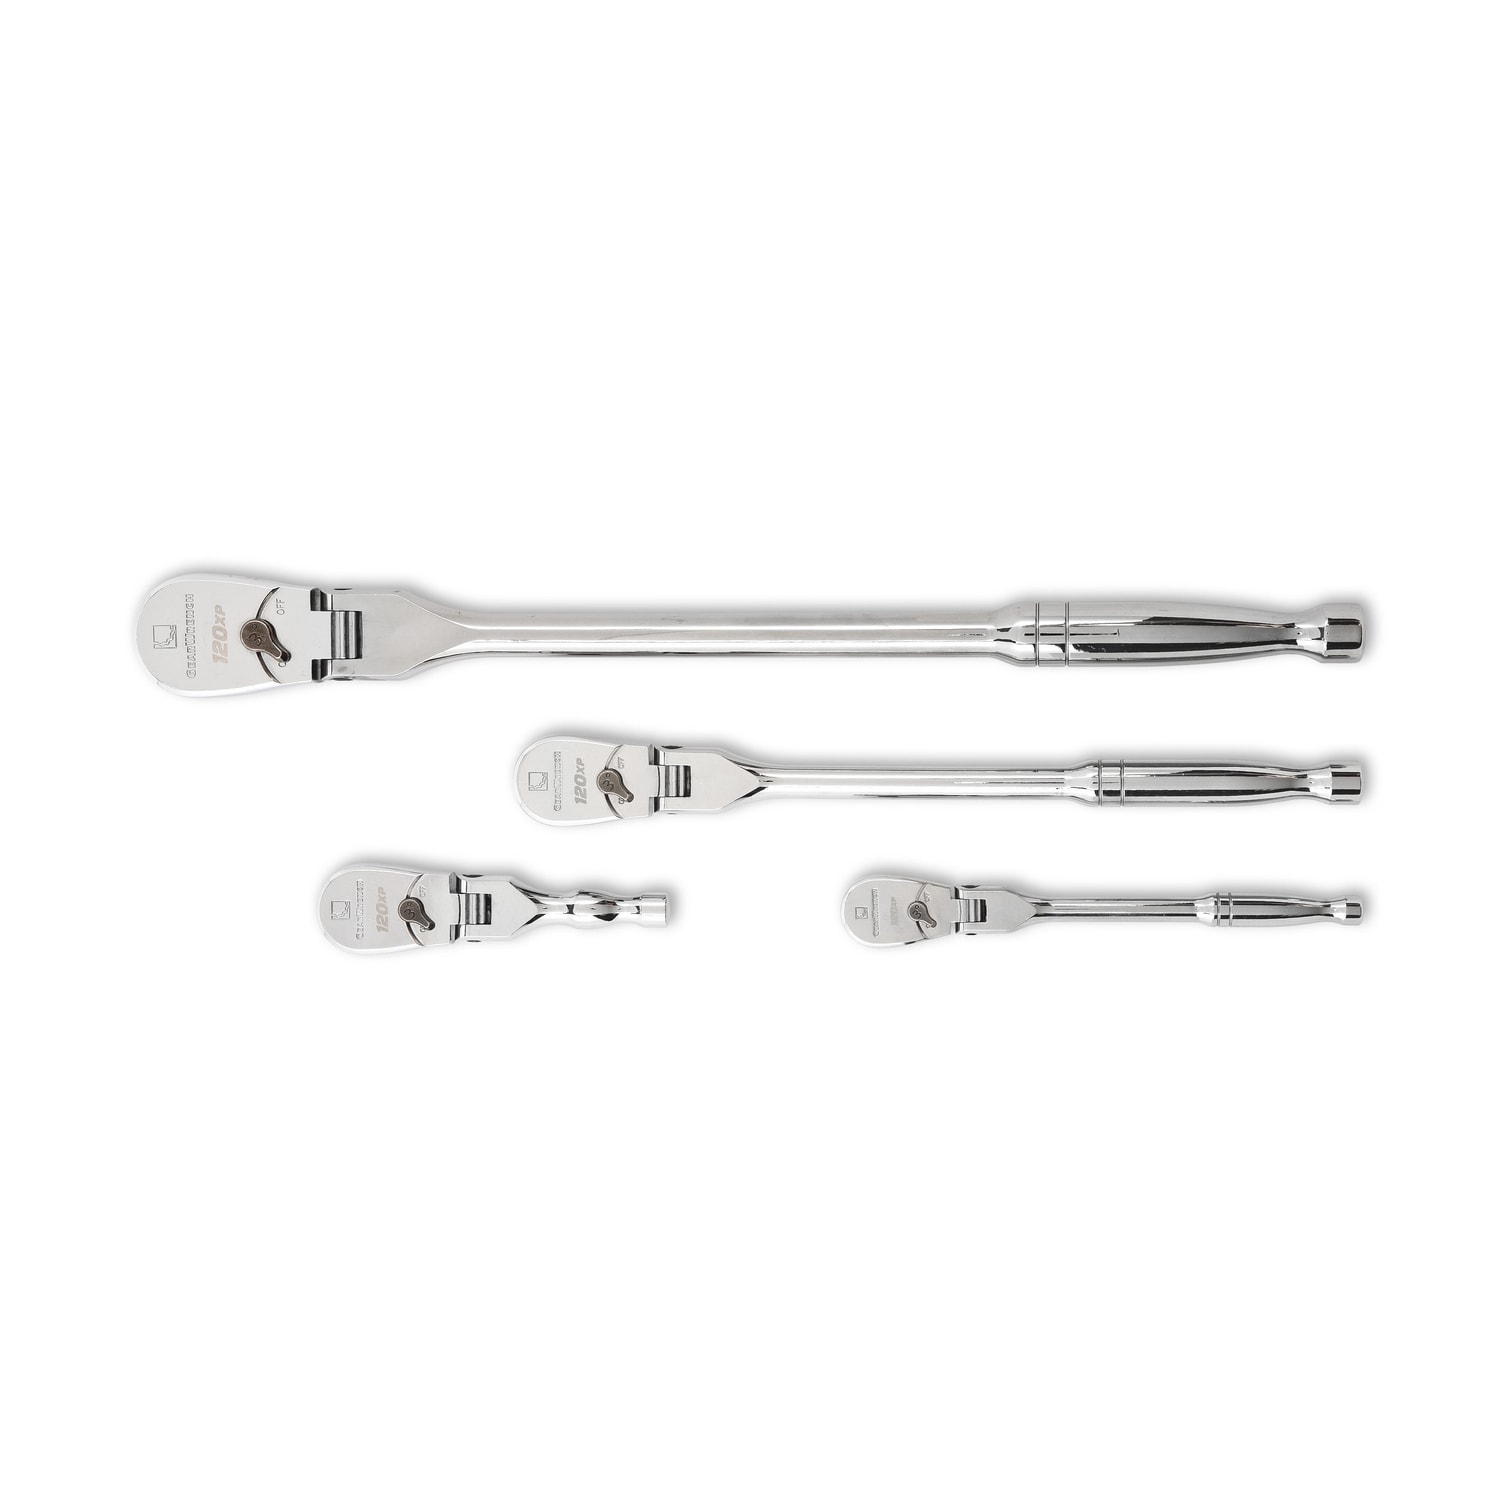 GEARWRENCH Ratchets & Breaker Bars at Lowes.com